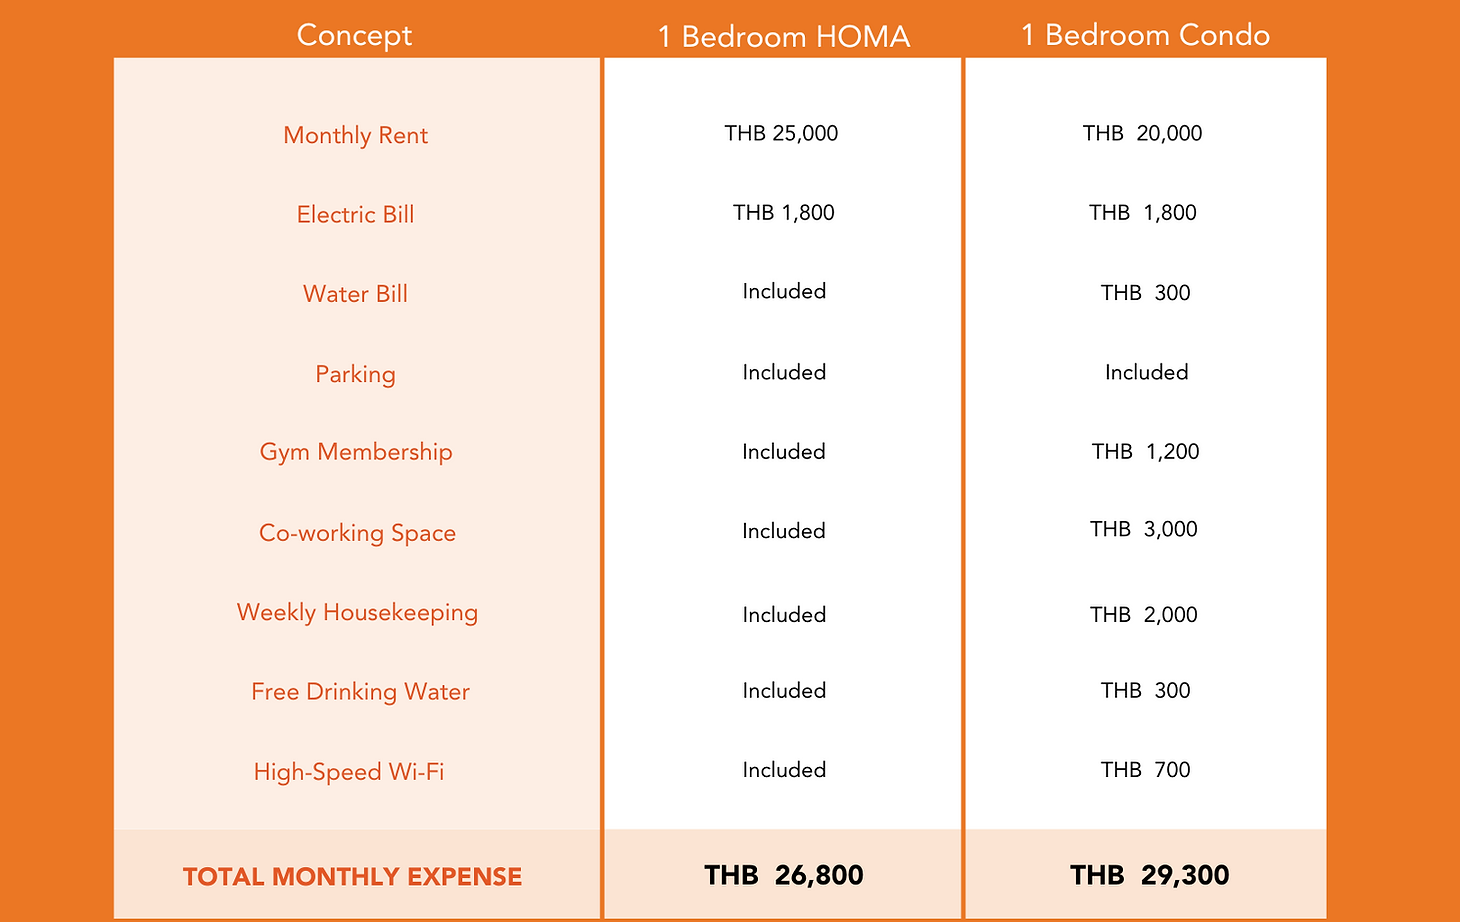 HOMA Phuket Town's Price Comparison to a Standard Apartment